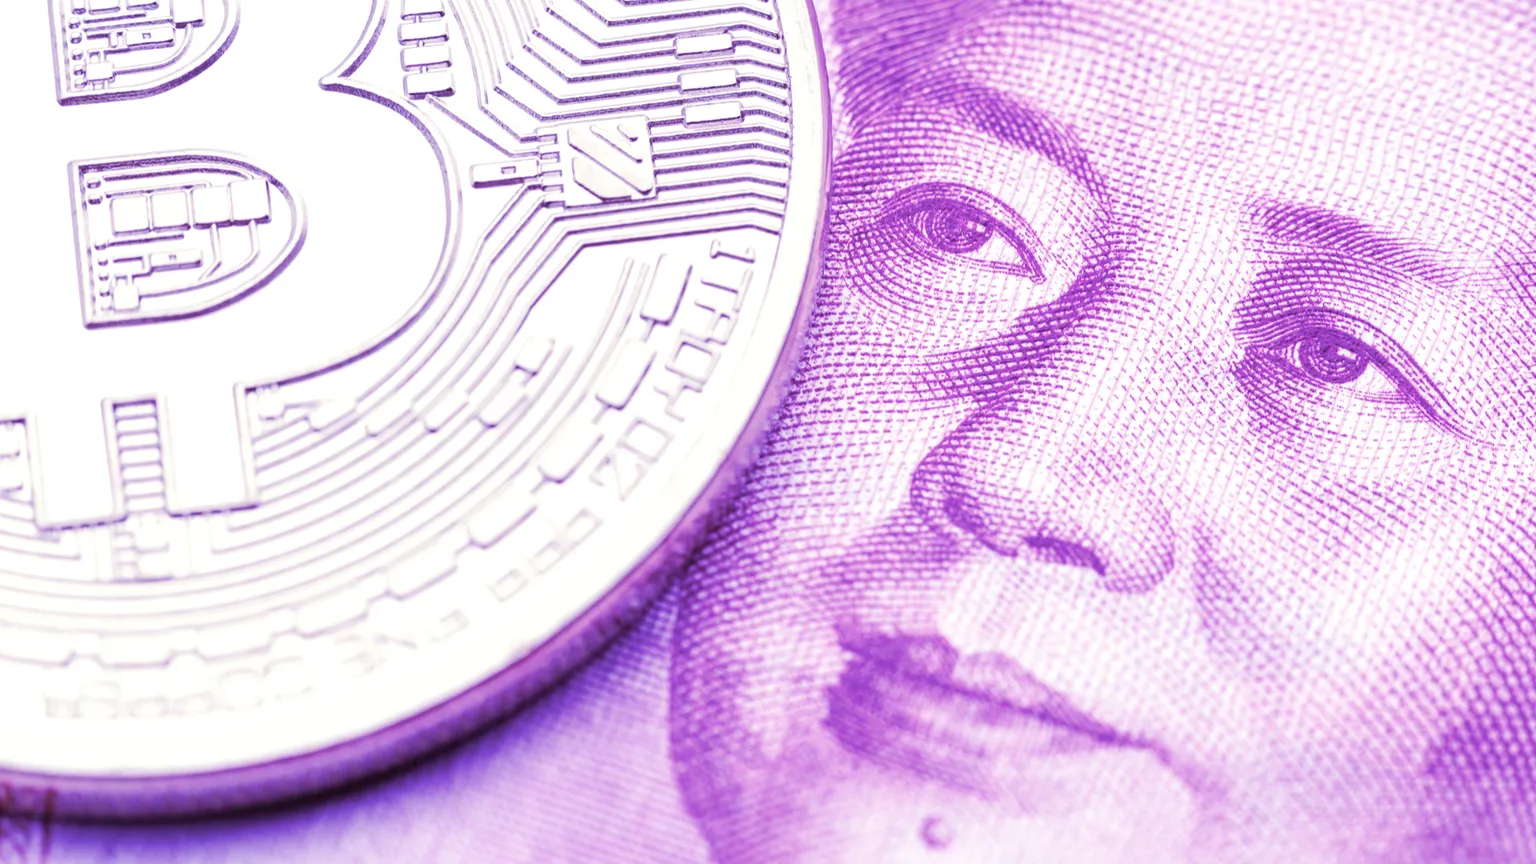 China and crypto. Image: Shutterstock